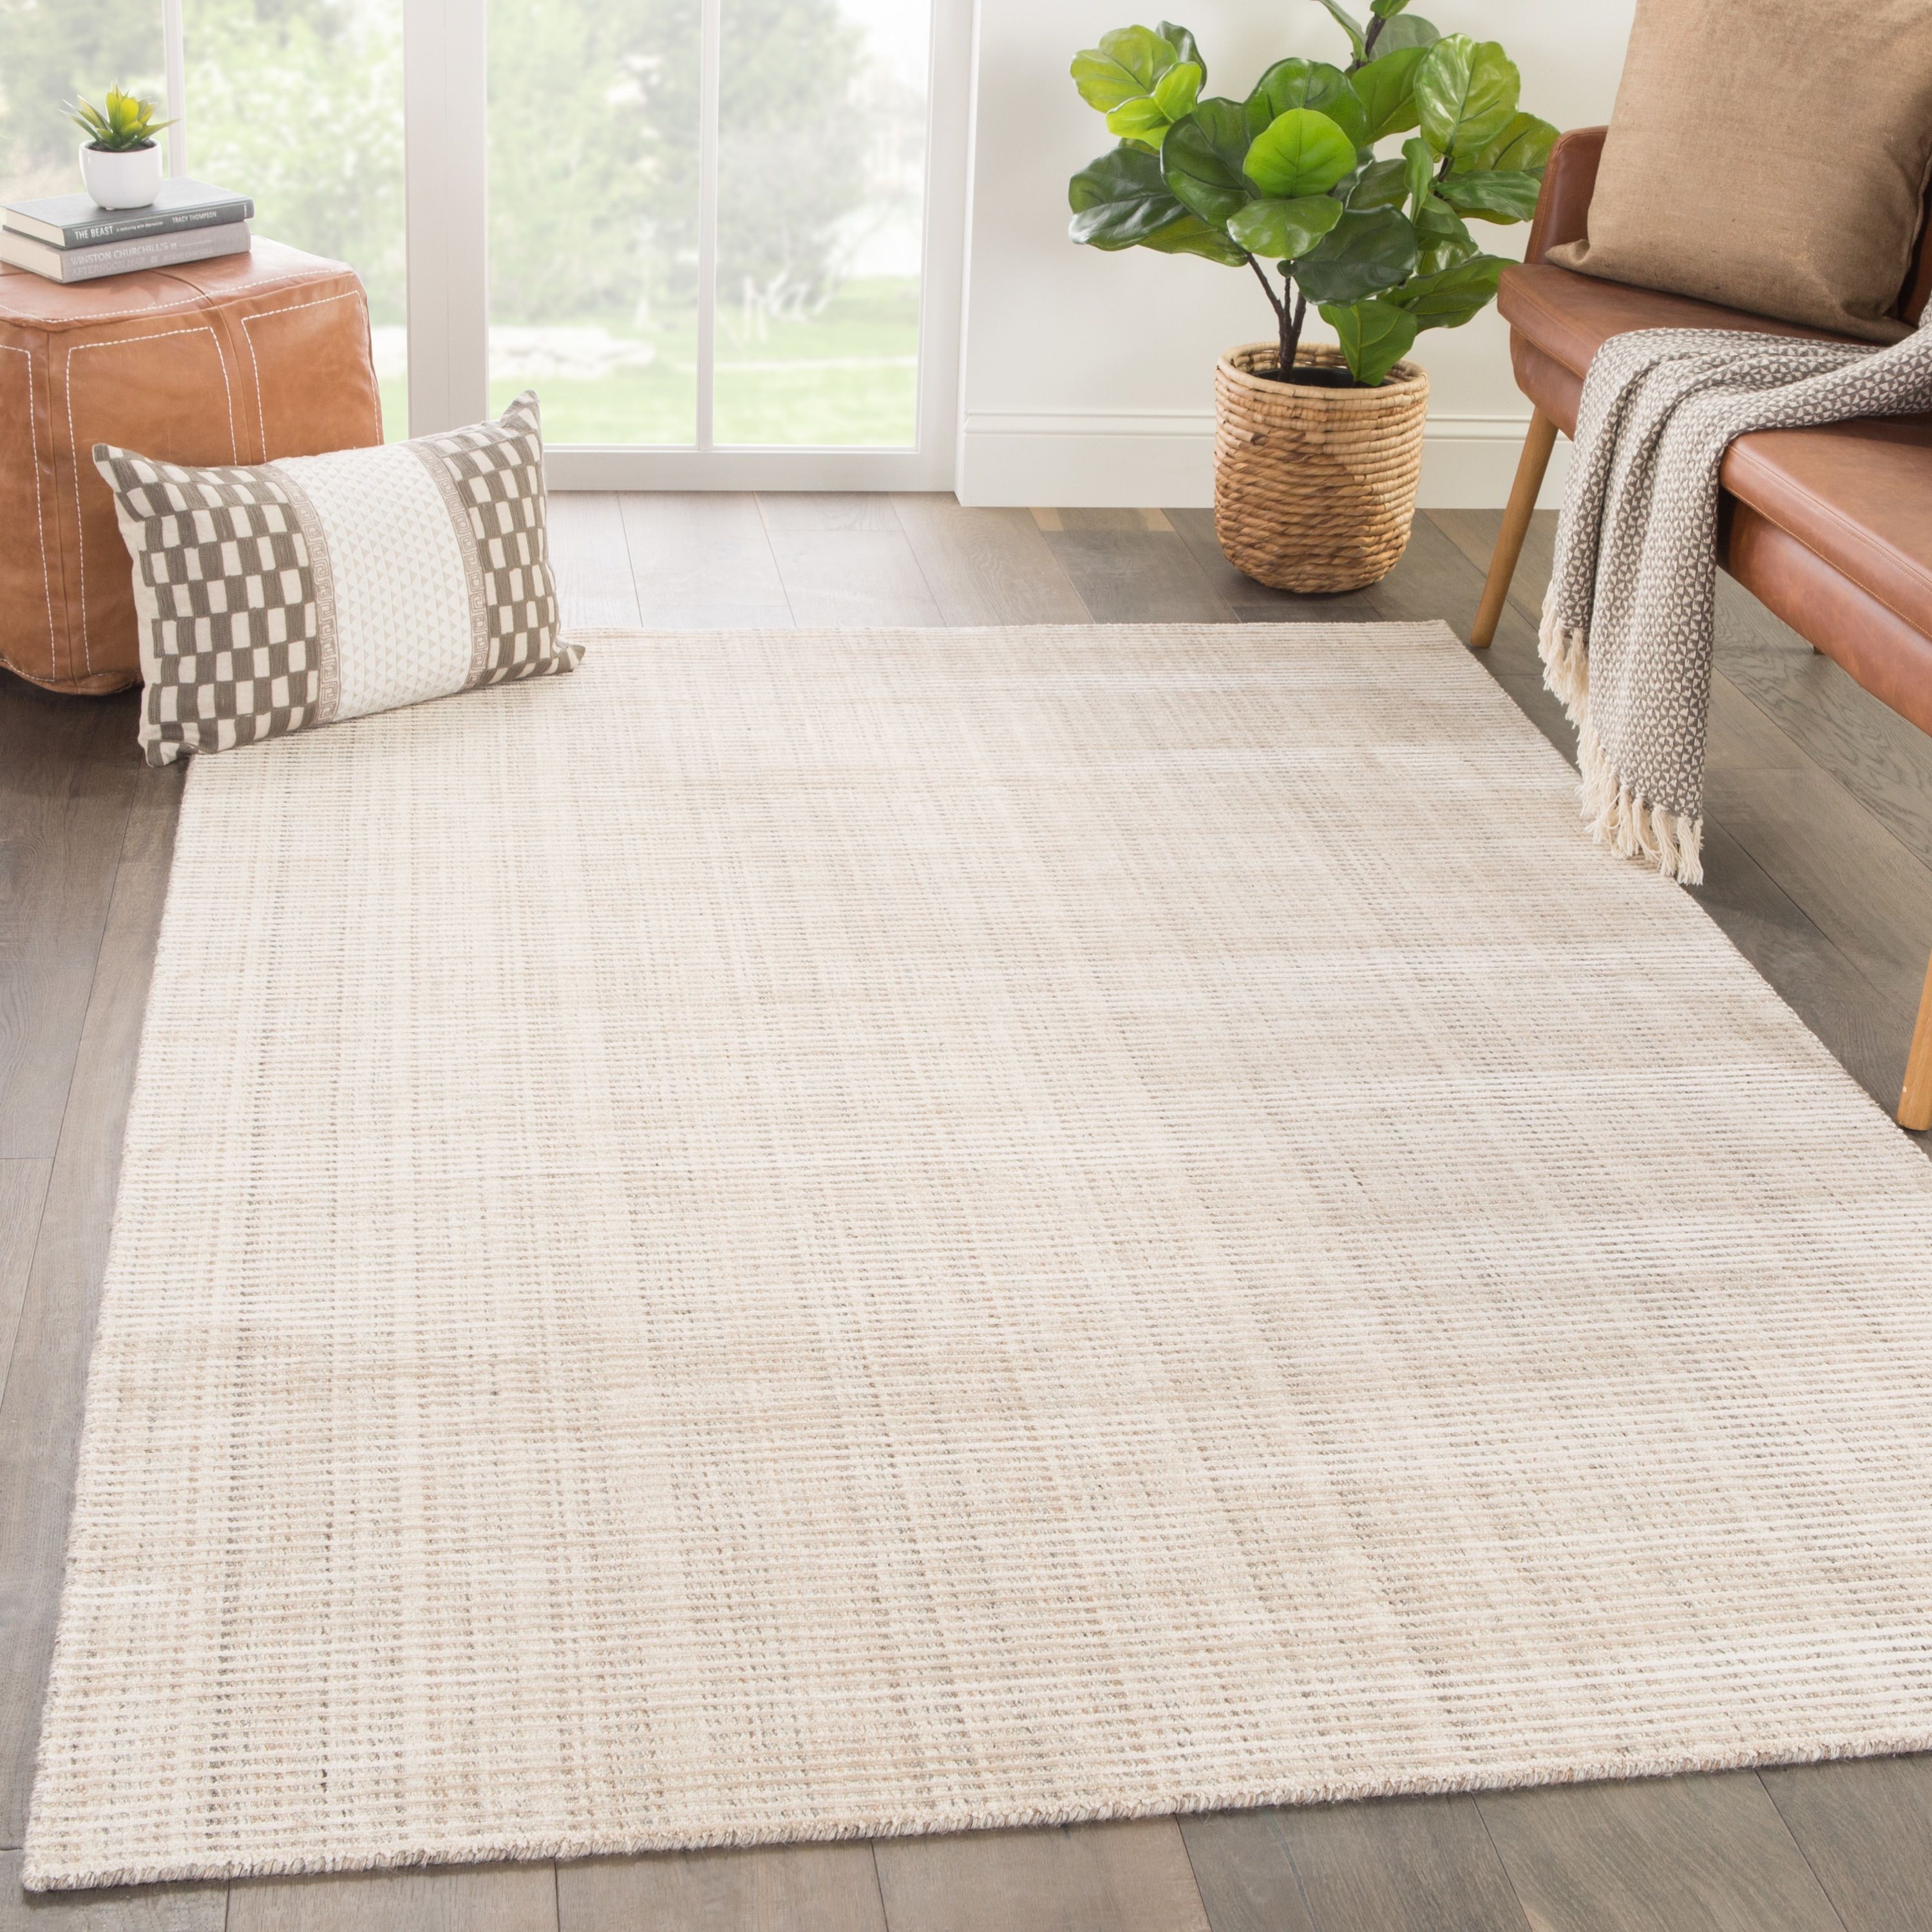 Phase Handmade Solid Ivory/ Beige Area Rug (8Undefined X 10Undefined) –  7Undefined10" X 9Undefined10" – Overstock – 20582652 With Ivory Beige Rugs (View 4 of 15)